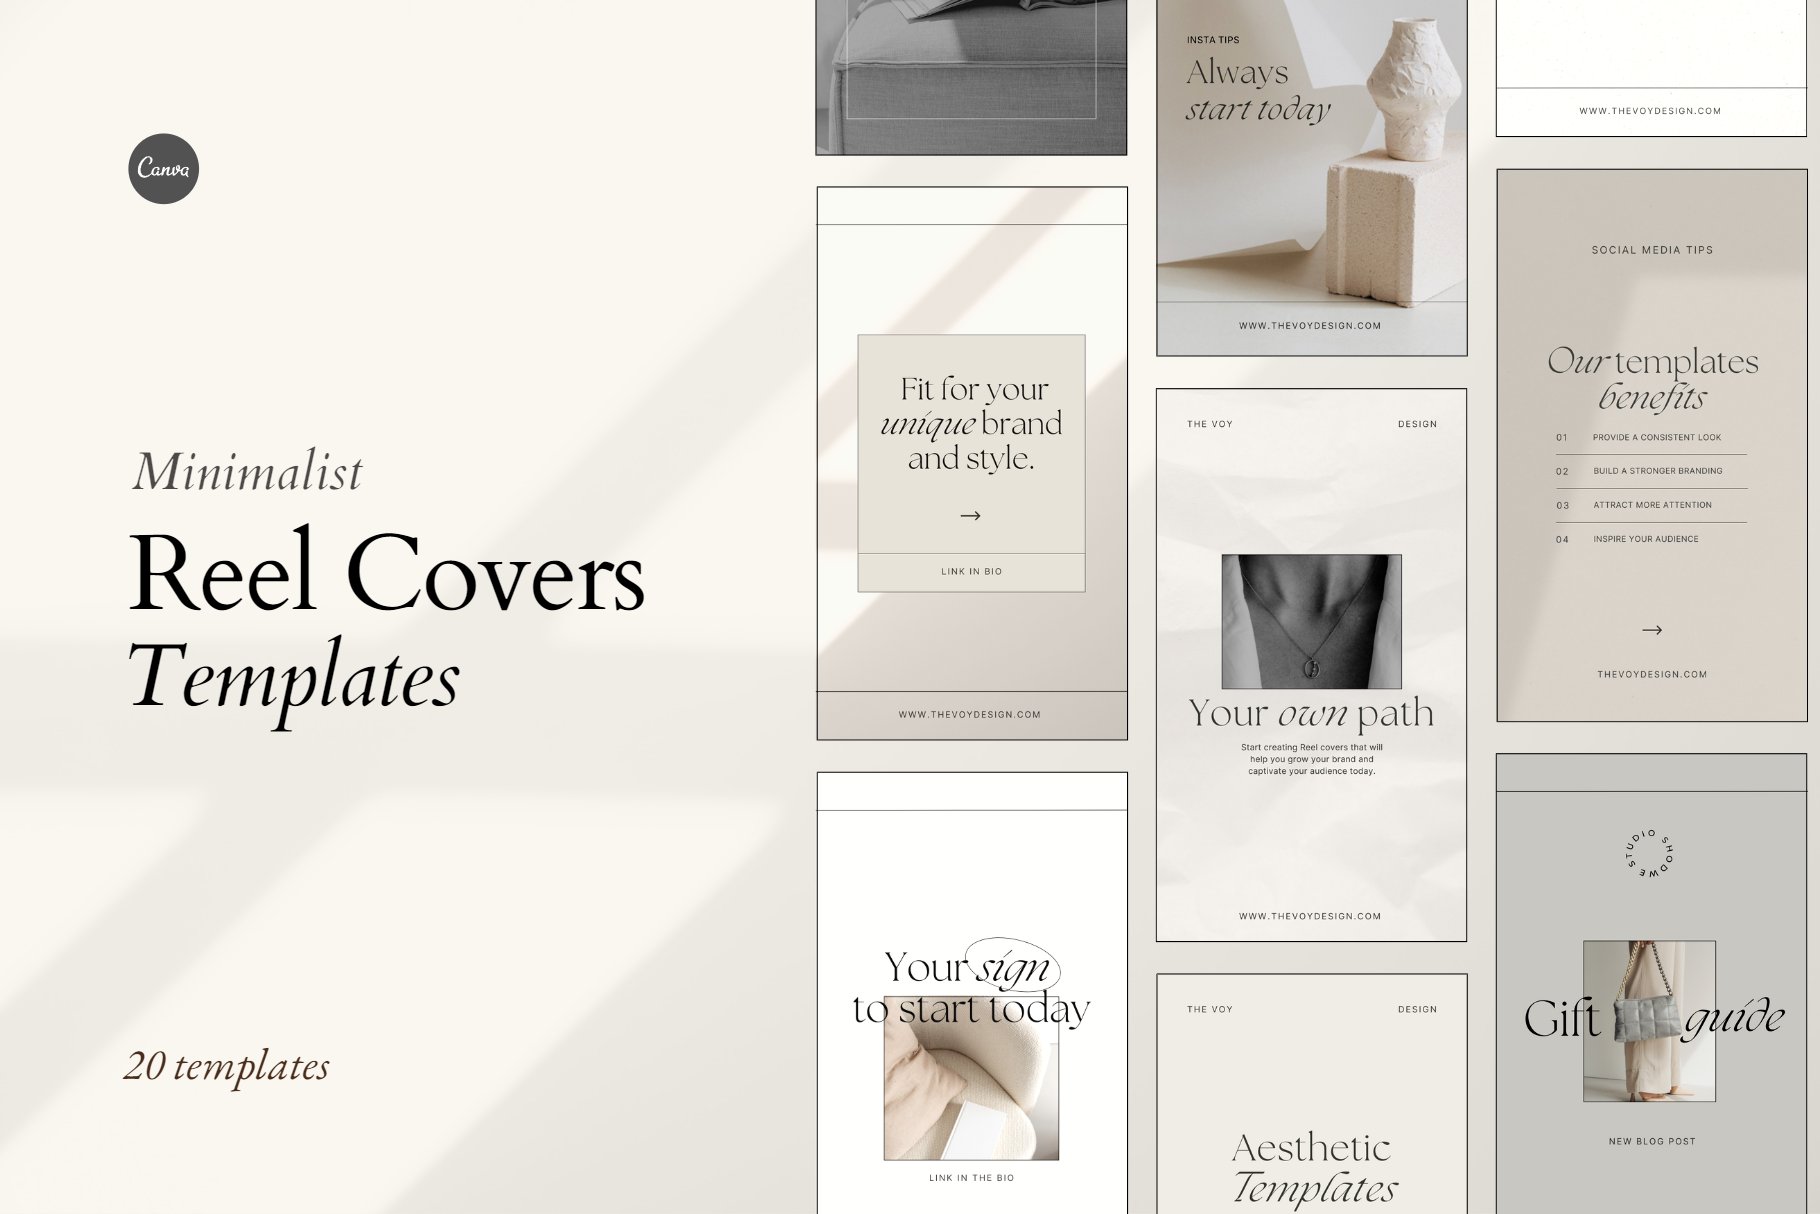 20 Minimalist Reel Covers for Canva cover image.